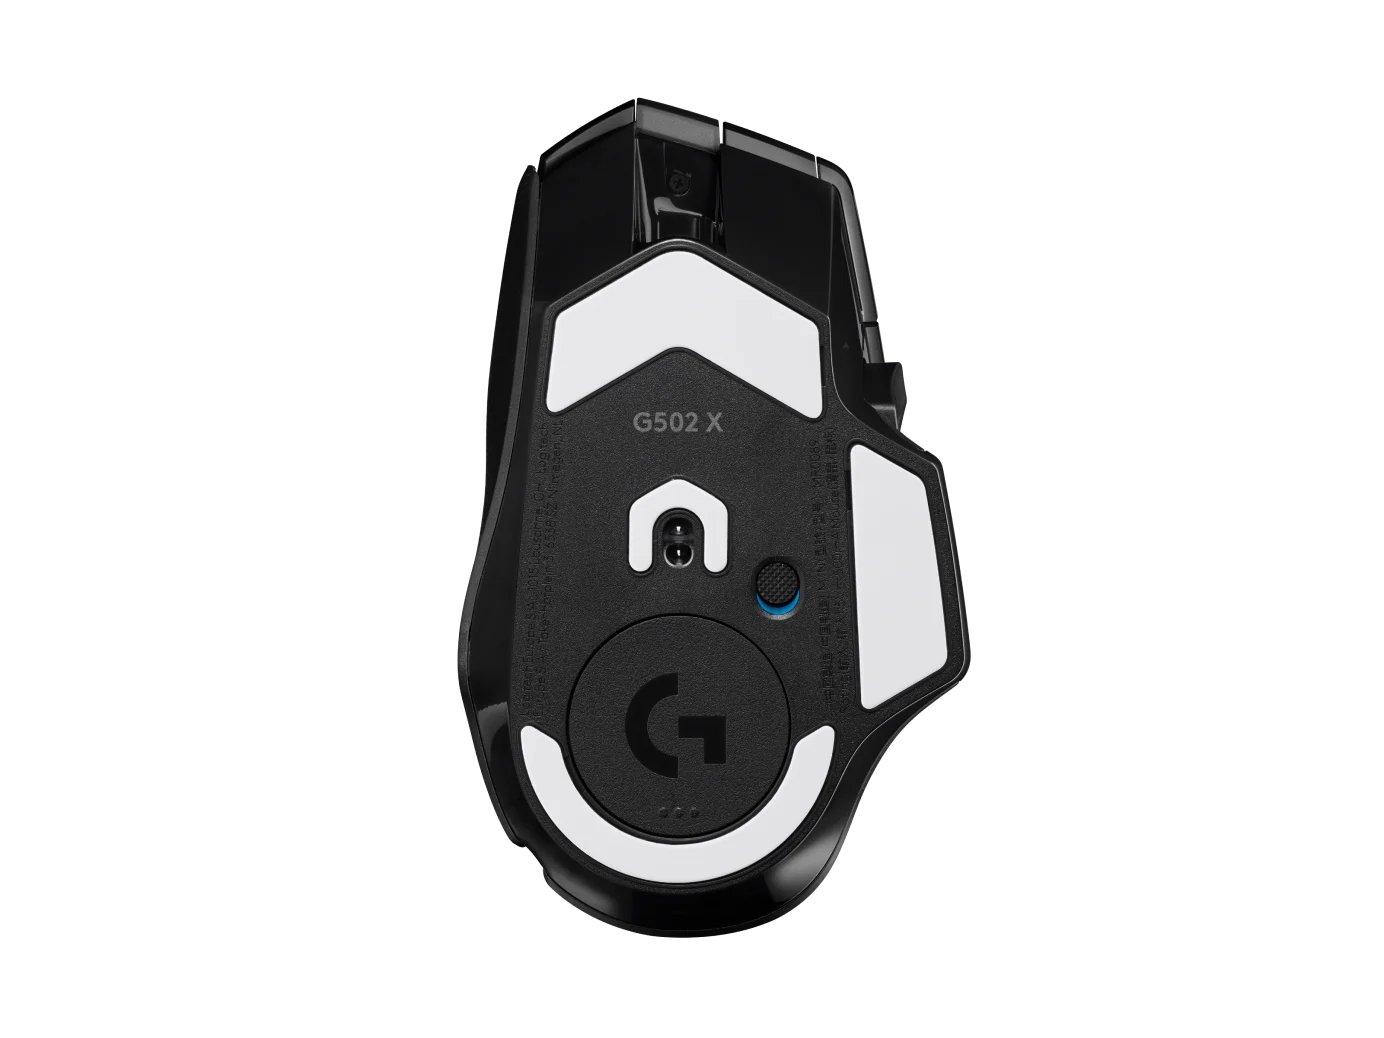  Logitech G502 Lightspeed Wireless RGB Gaming Mouse and